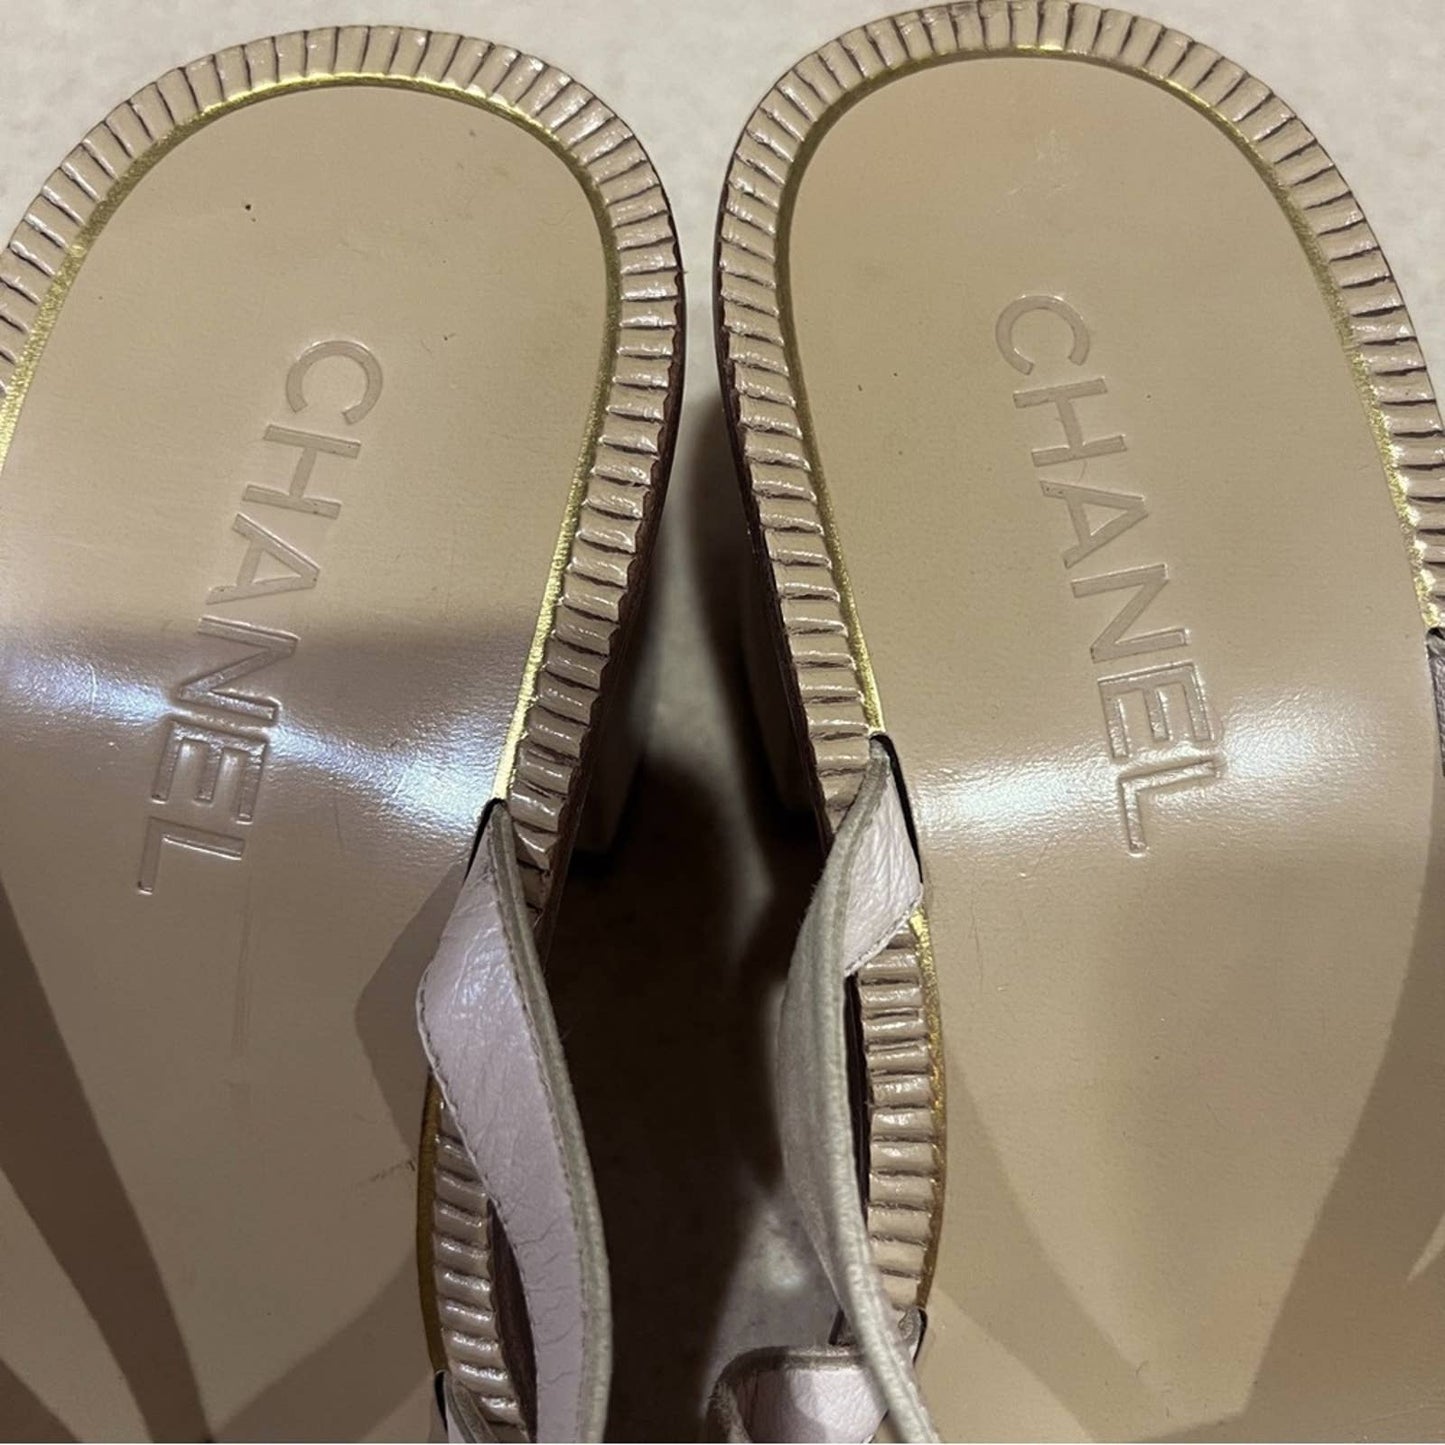 CHANEL Tan Leather Thong Strappy 3” Heel Sandals 38/&